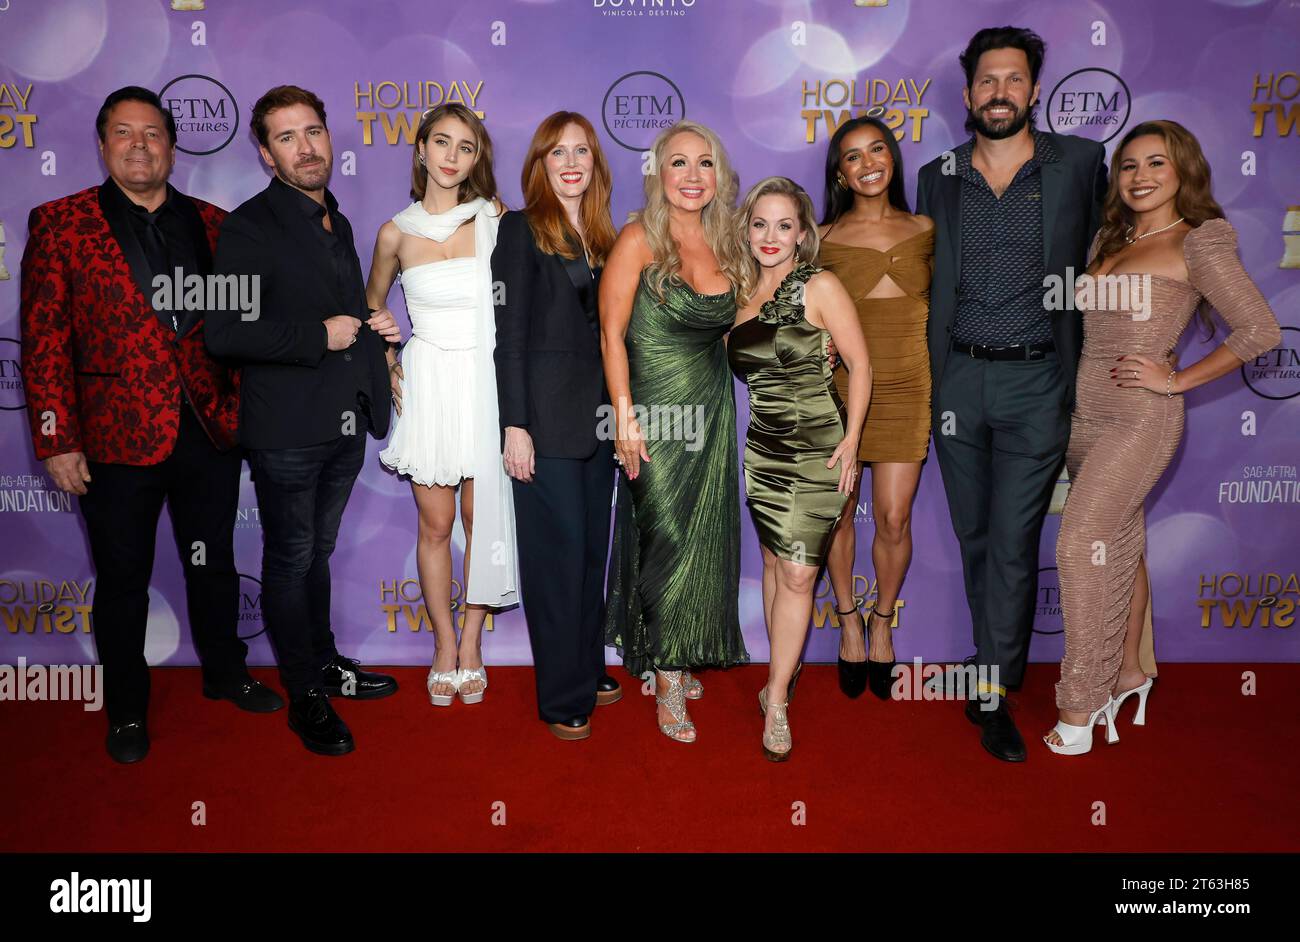 HOLLYWOOD, CA - NOVEMBER 7: Jeff Rector, Caylee Cowan, Sadie Stratton, Stephanie Garvin, Kelly Stables, Melody Thorton, Brian Thomas Smith, Haley Reinhard at the world premiere of Holiday Twist at the TCL Chinese Theater in Hollywood, California on November 7, 2023. Copyright: xFayexSadoux Credit: Imago/Alamy Live News Stock Photo